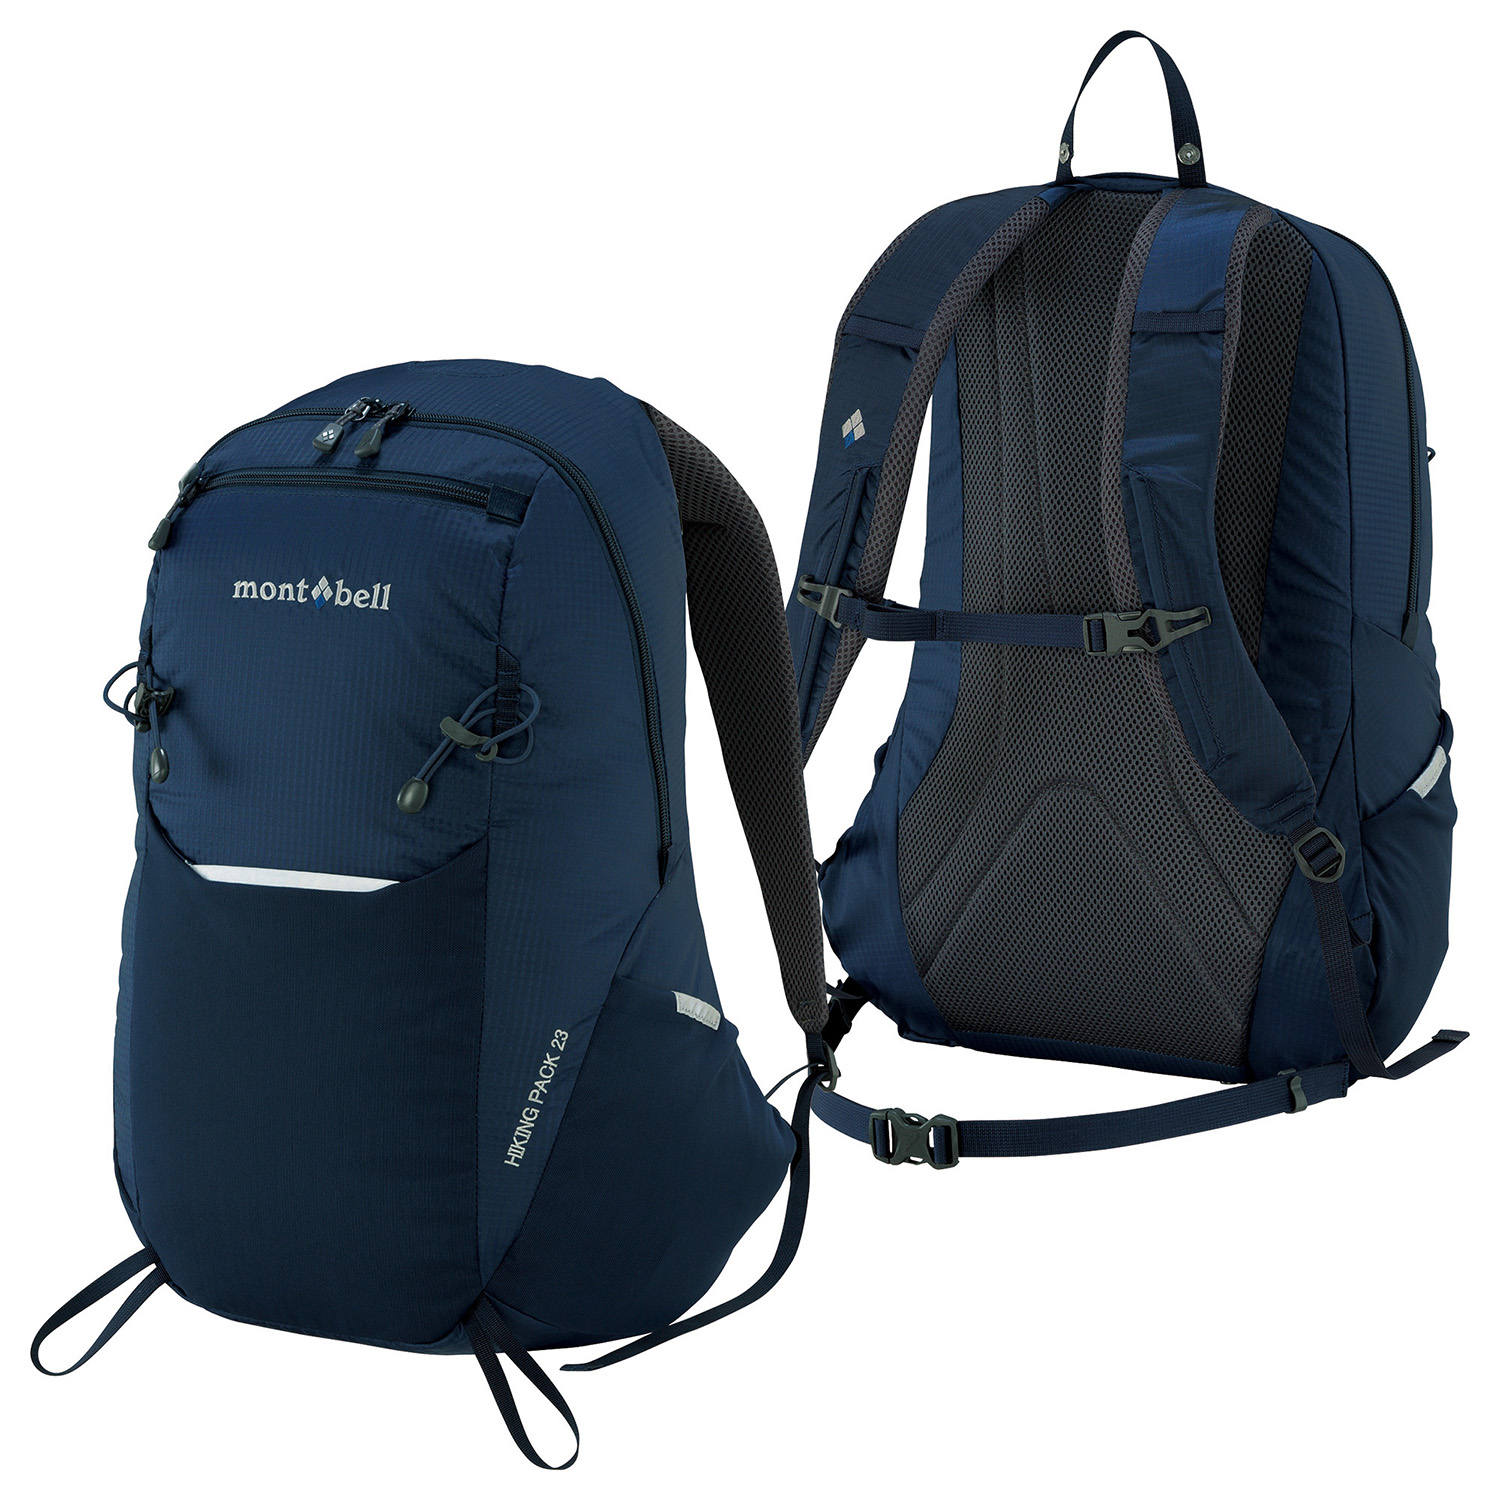 Hiking Pack 23 | Montbell America